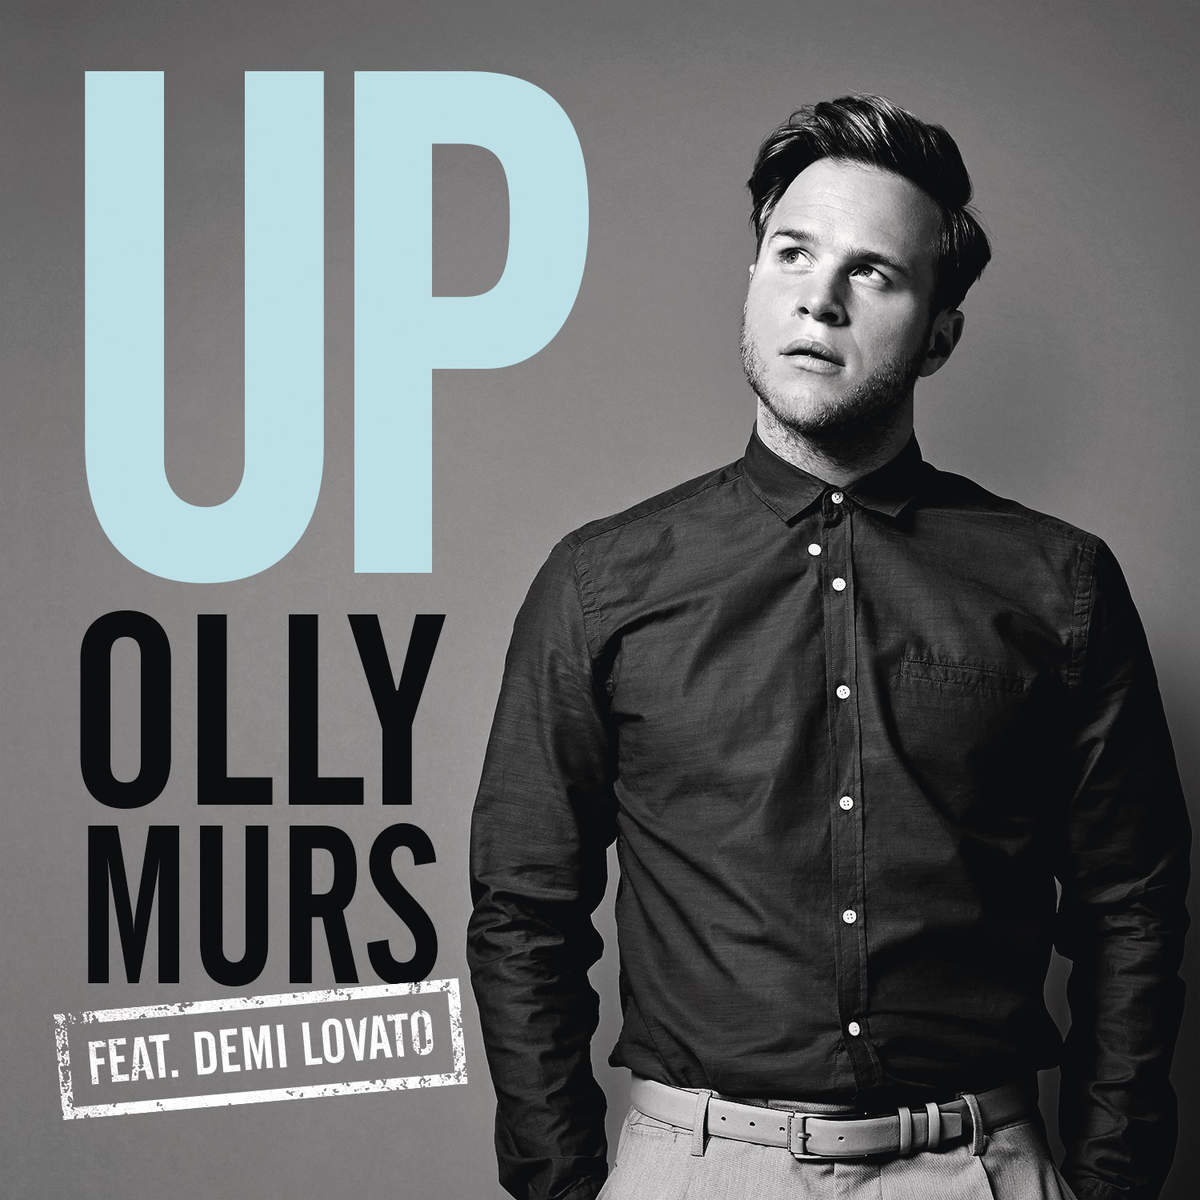 Nuevo Single >> "Up" (Olly Murs ft. Demi Lovato) Cover1200x1200